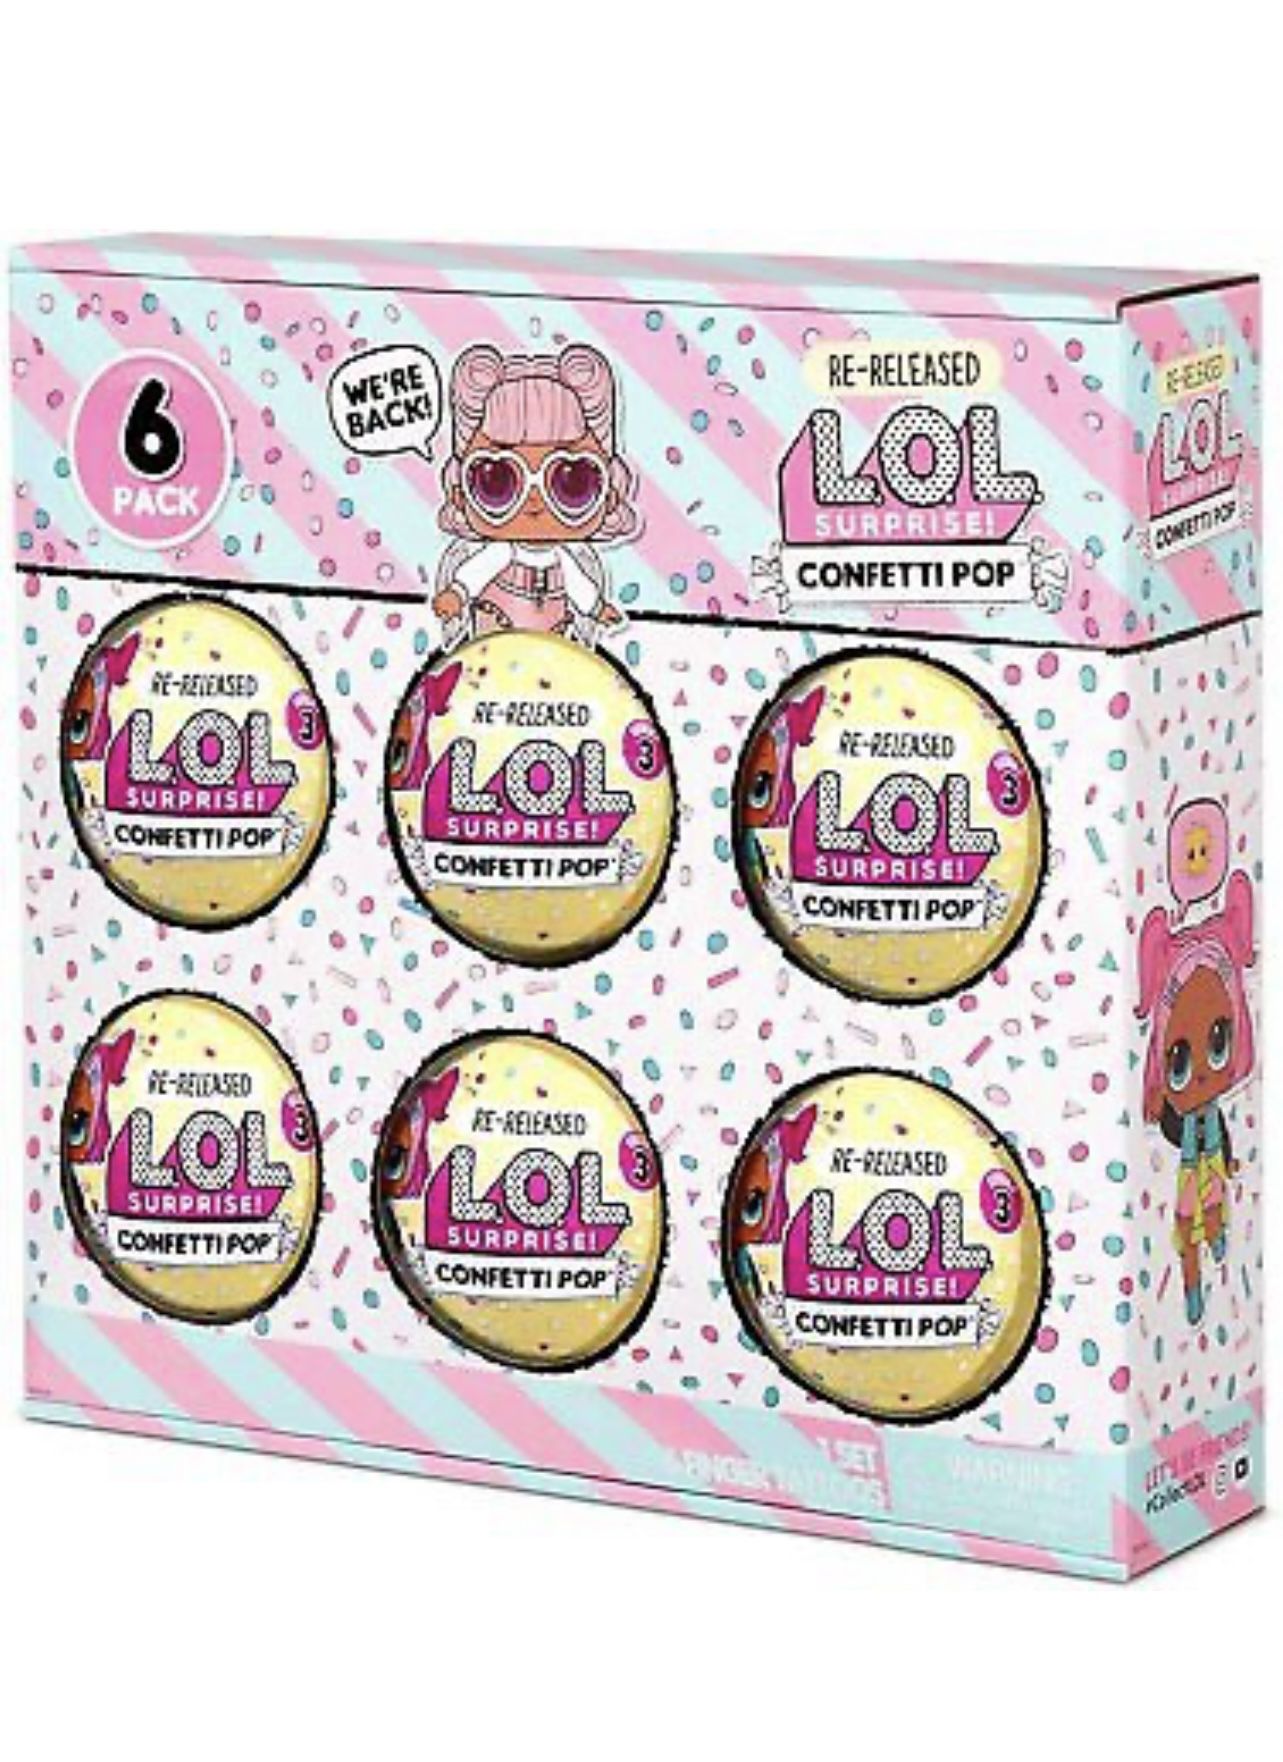 2020 LOL Surprise Confetti Pop 6-Pack Angel Re-Released Fashion Dolls Series 3